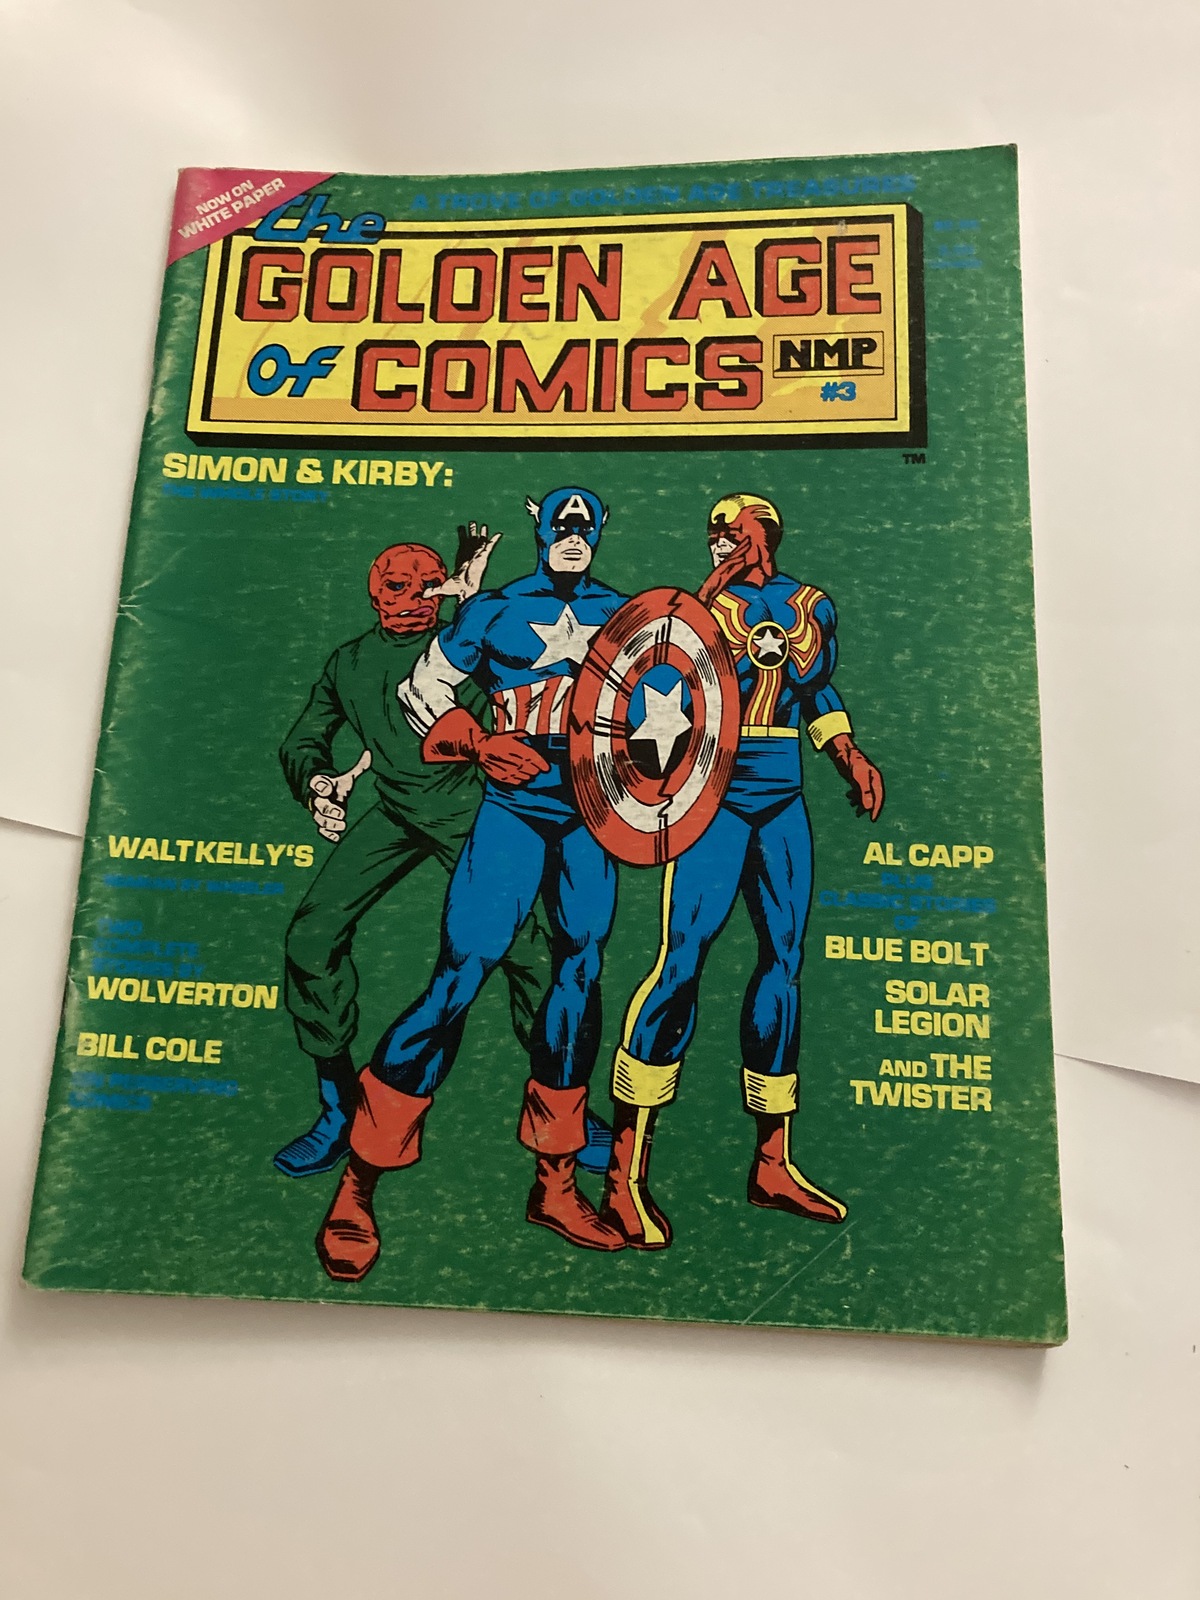 The GOLDEN AGE of COMICS [NMP] # 3 - $99.00